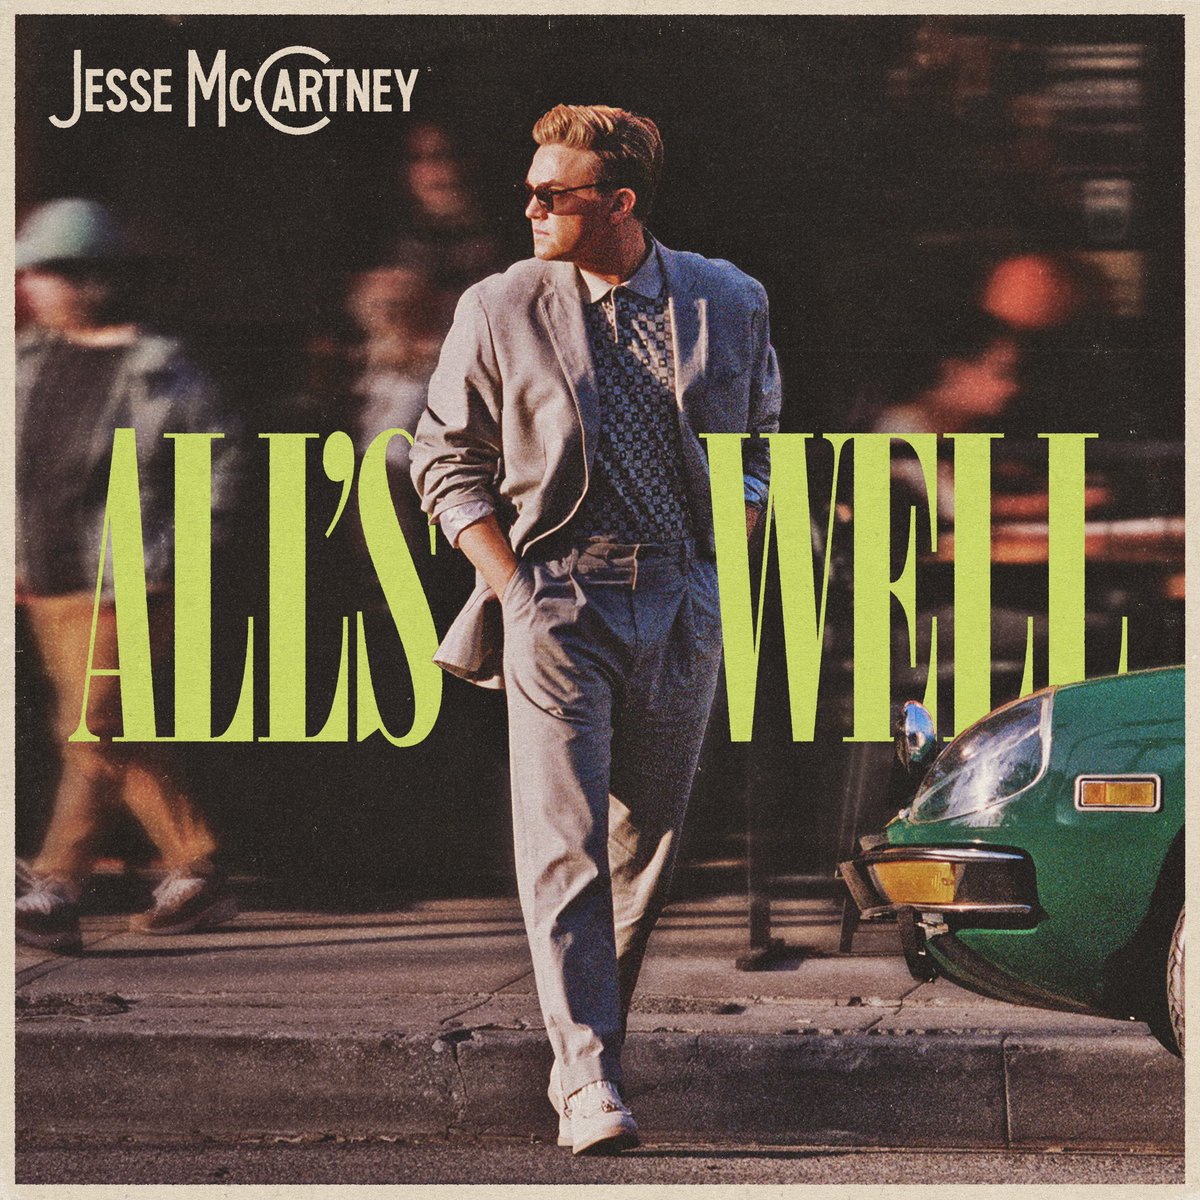 Thrilled to share that my new EP “All’s Well” is coming April 5th ✨ I can’t wait to share it with you! Pre-save: jesse-mccartney.ffm.to/allswell